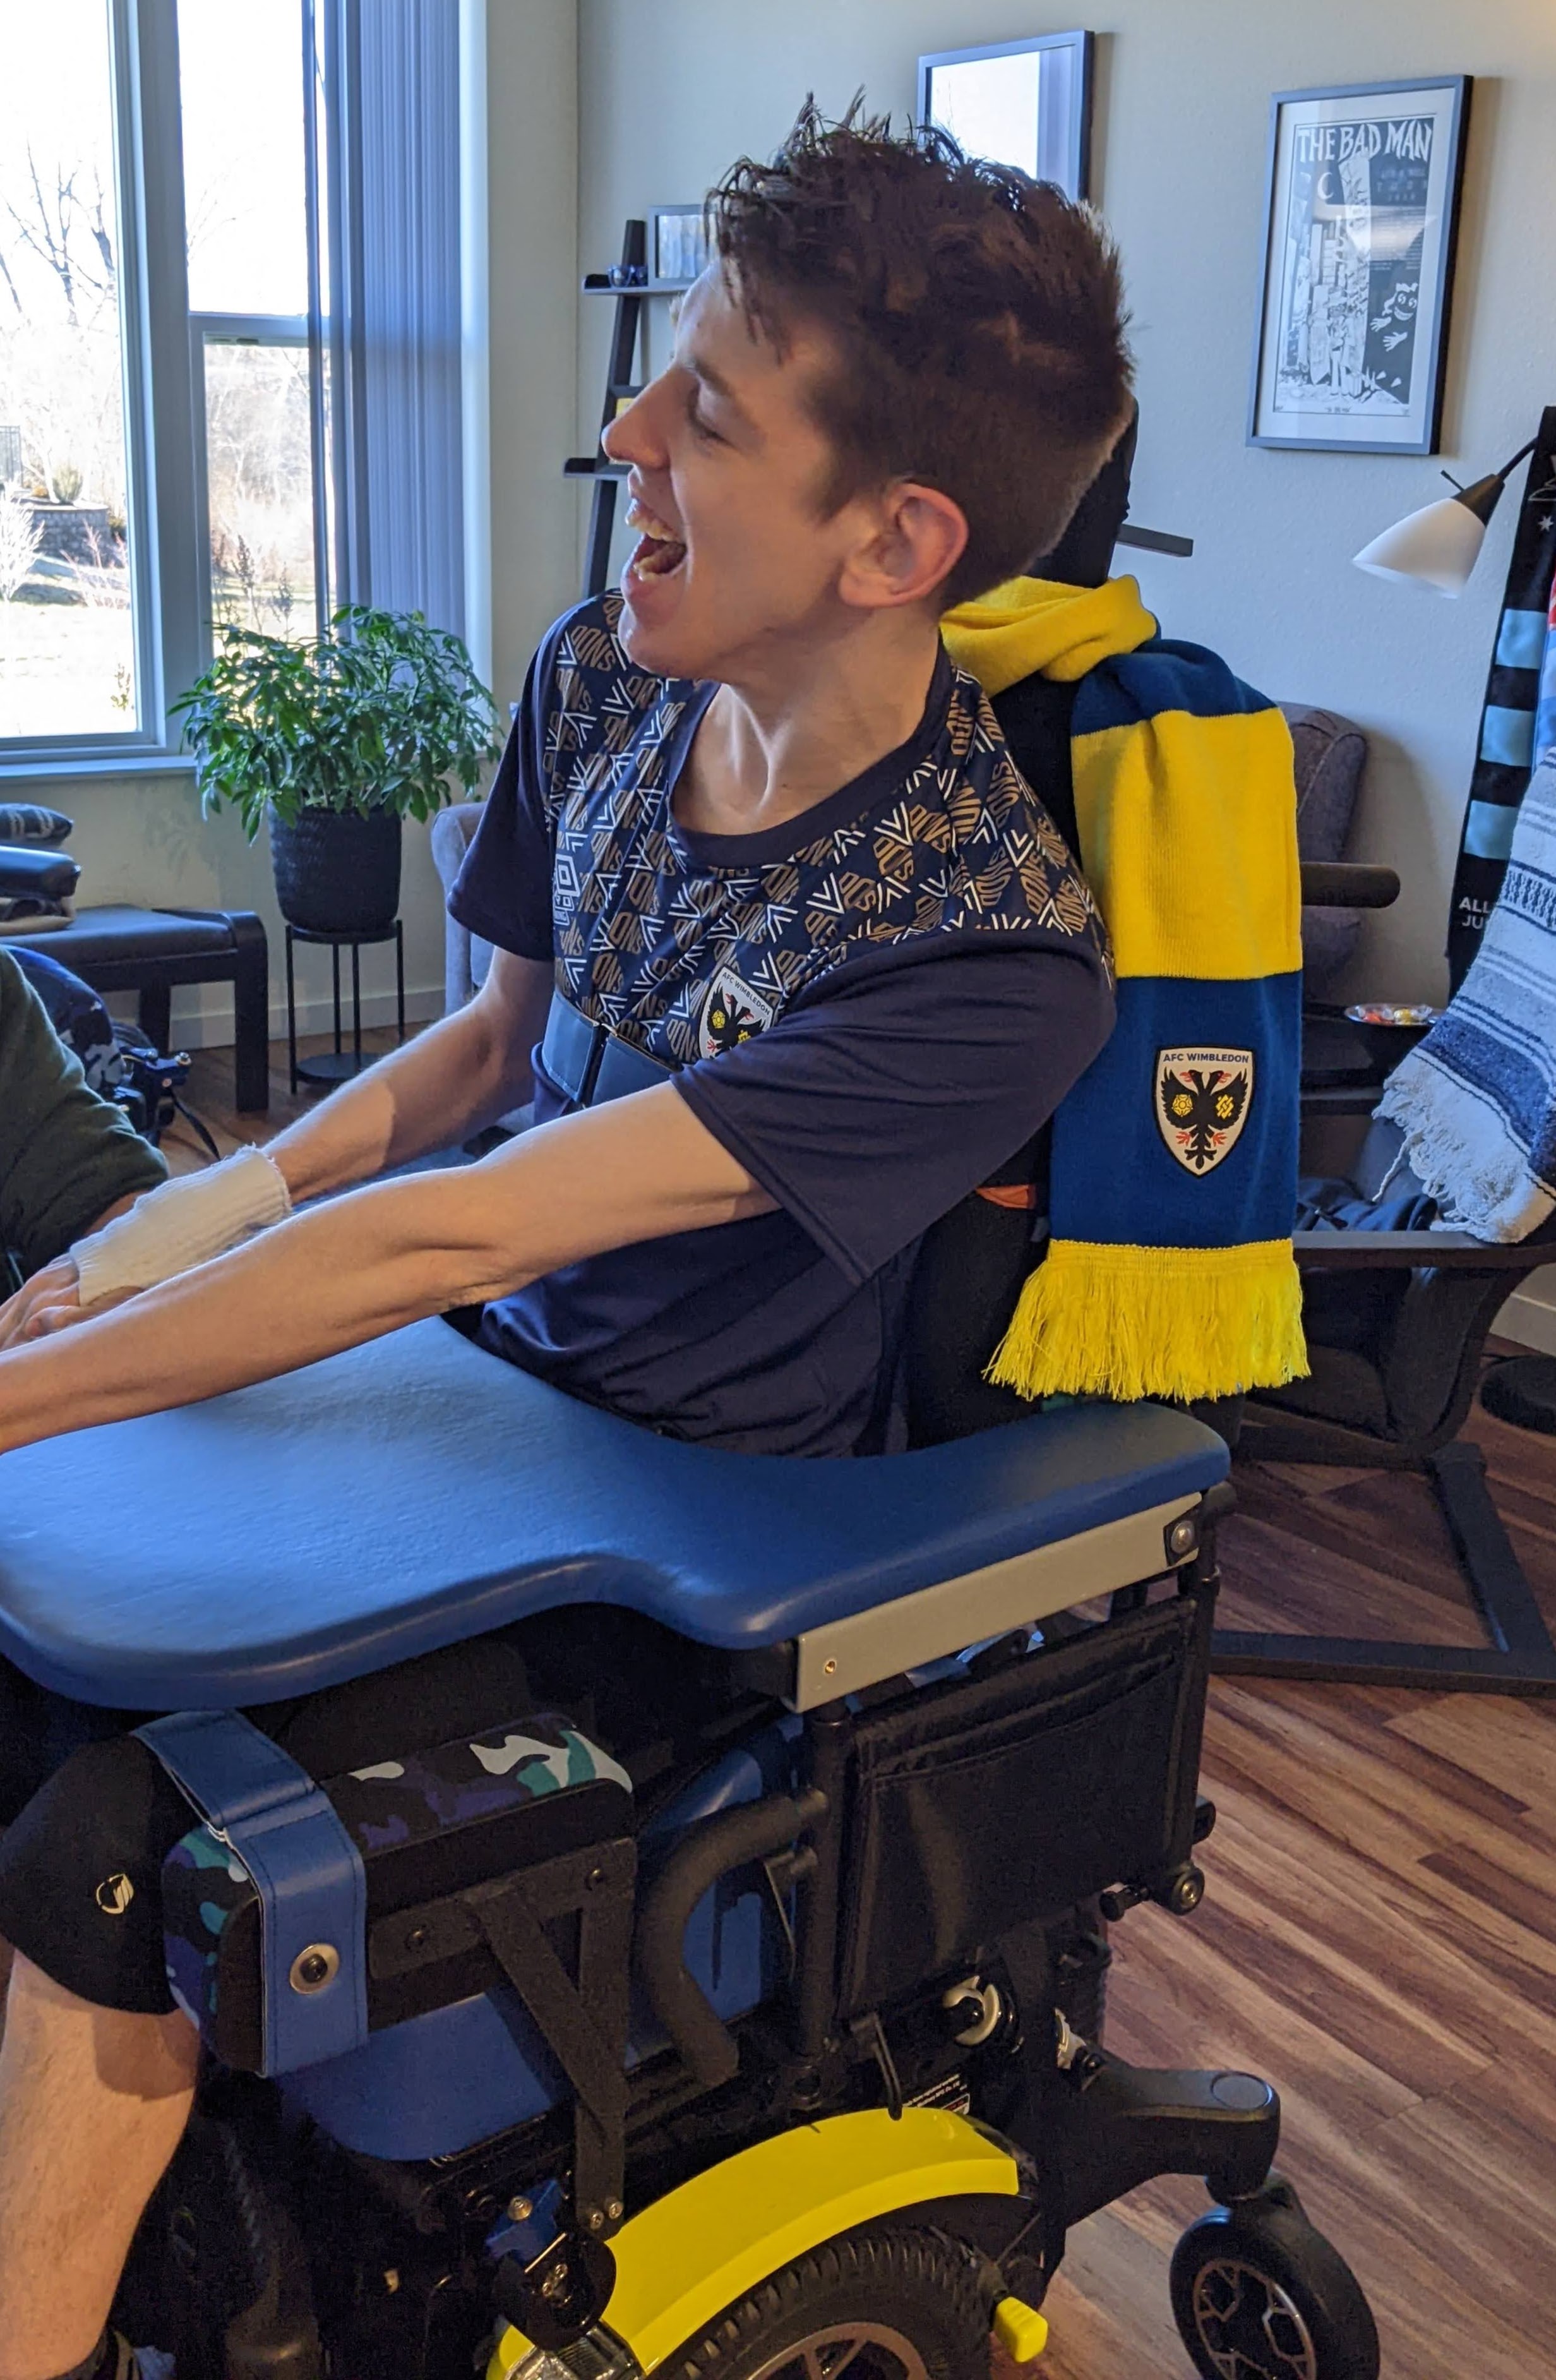 Justin, a smiling young man in his 20s, sitting in blue and yellow power wheelchair, blue and yellow AFC Wimbledon scarf wrapped around headrest